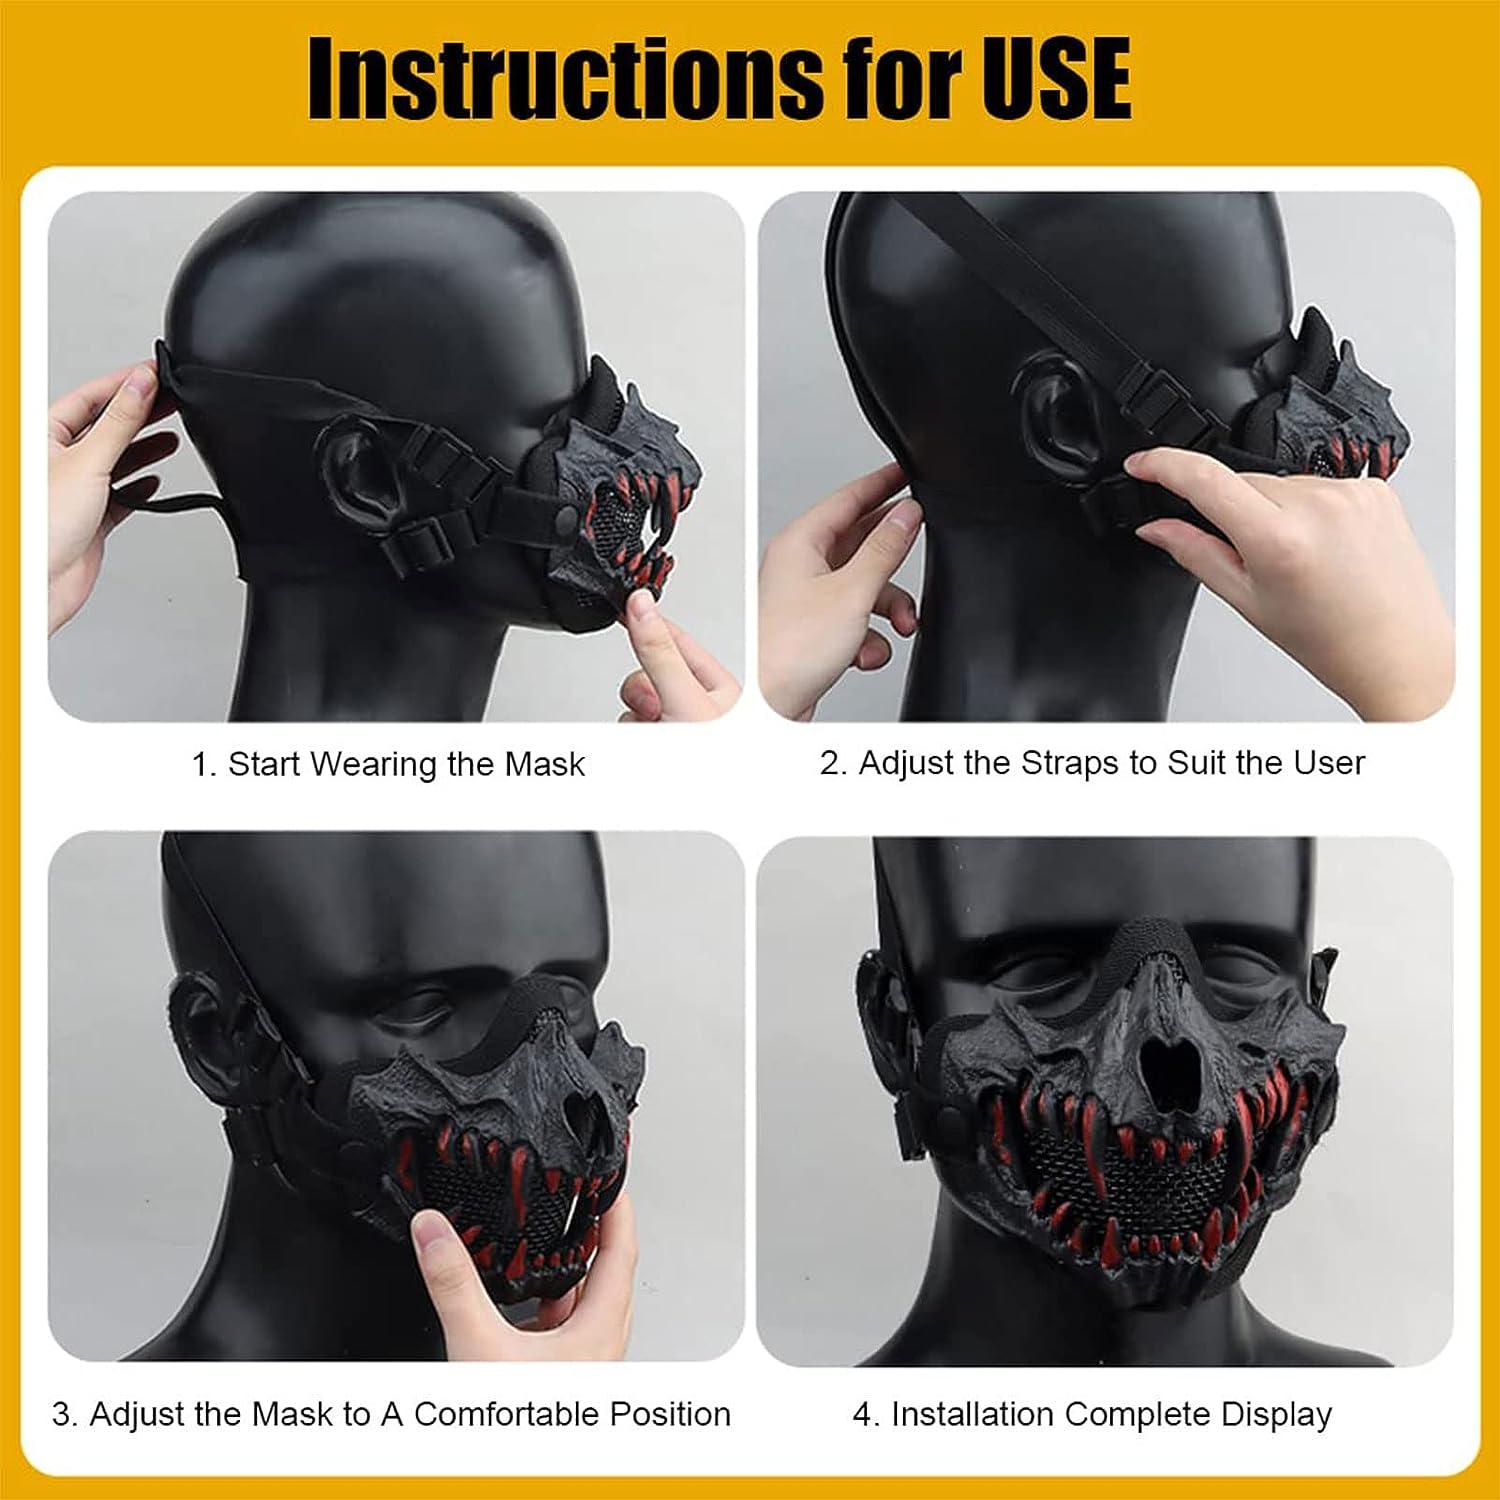 Super Durable Ghost Mask Eye Protection With Metal Mesh or 